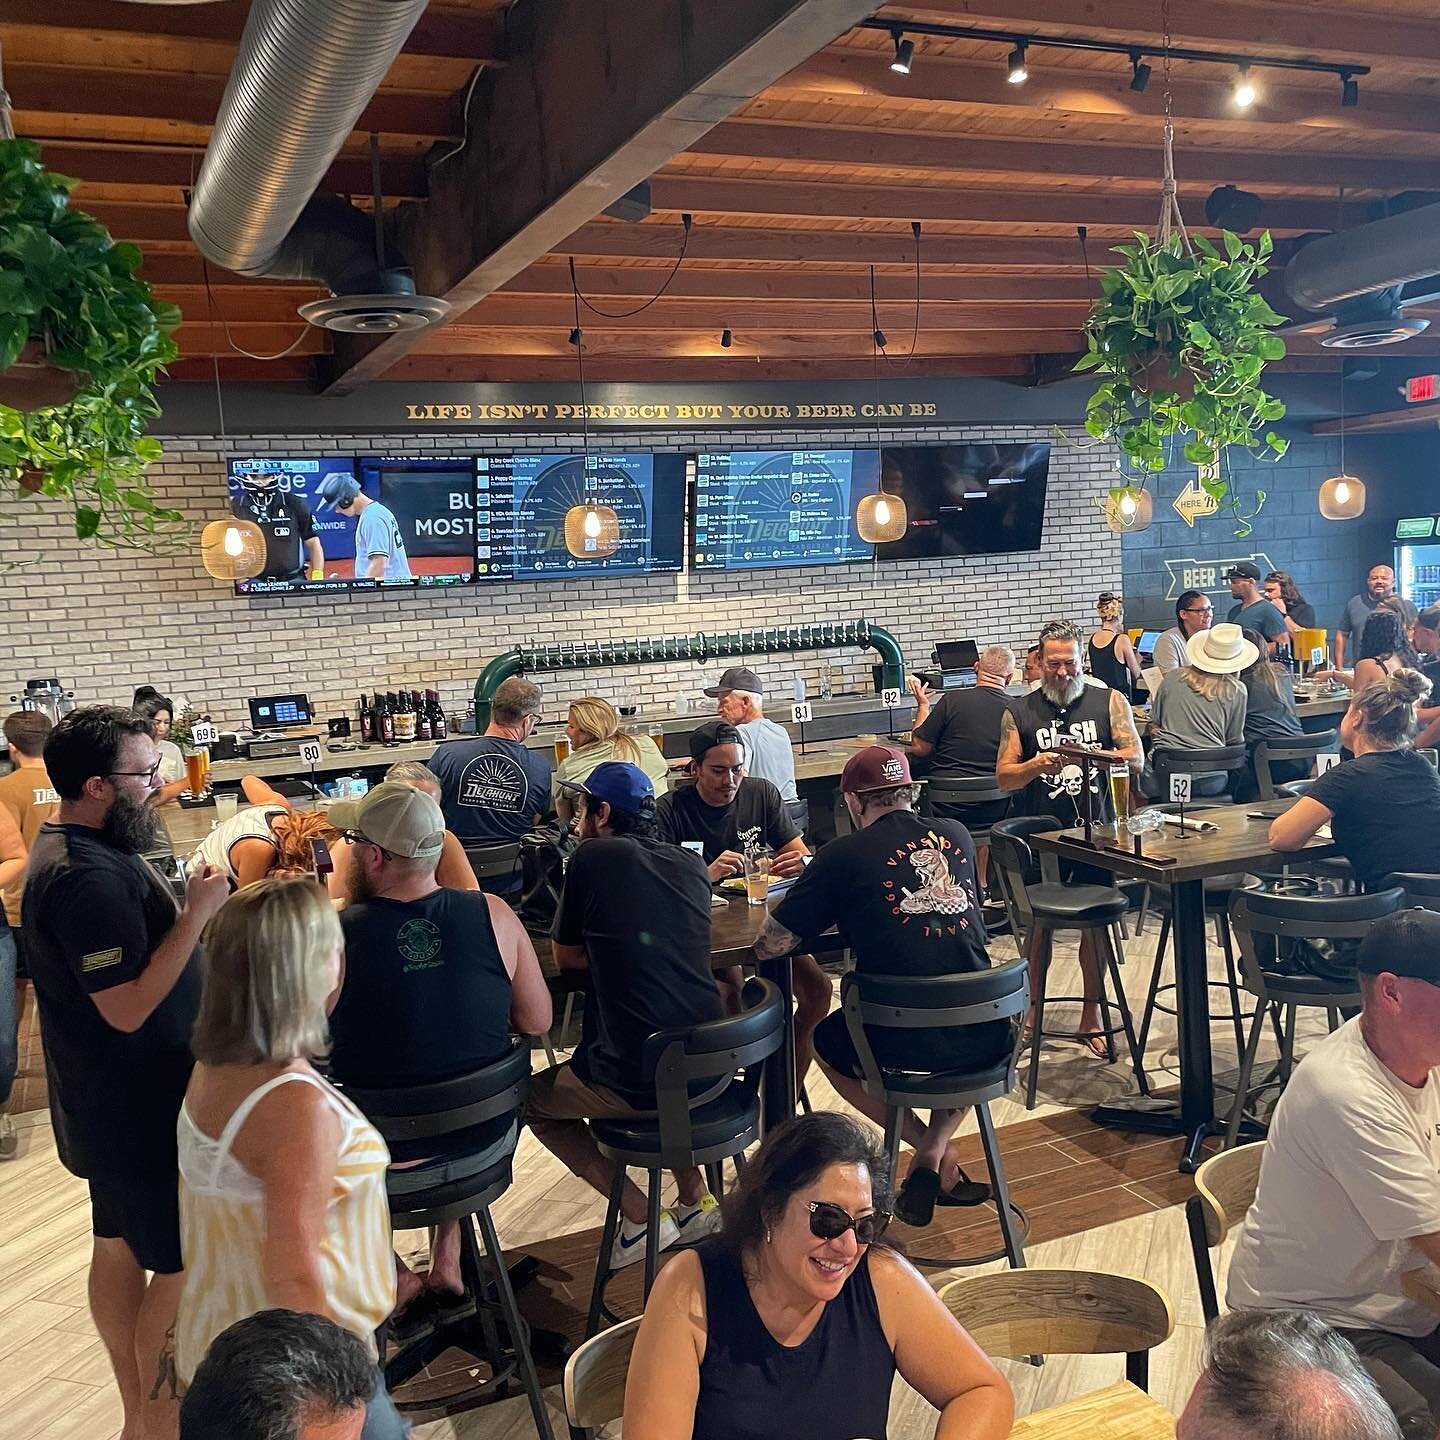 What an awesome day, we want to thank you all for coming out and helping us celebrate the grand opening of our Dana Point taproom, yesterday! @delahuntbrewing_dp 
@sm.familia and @cardjestures killed it along with our staff keeping the beer and food 